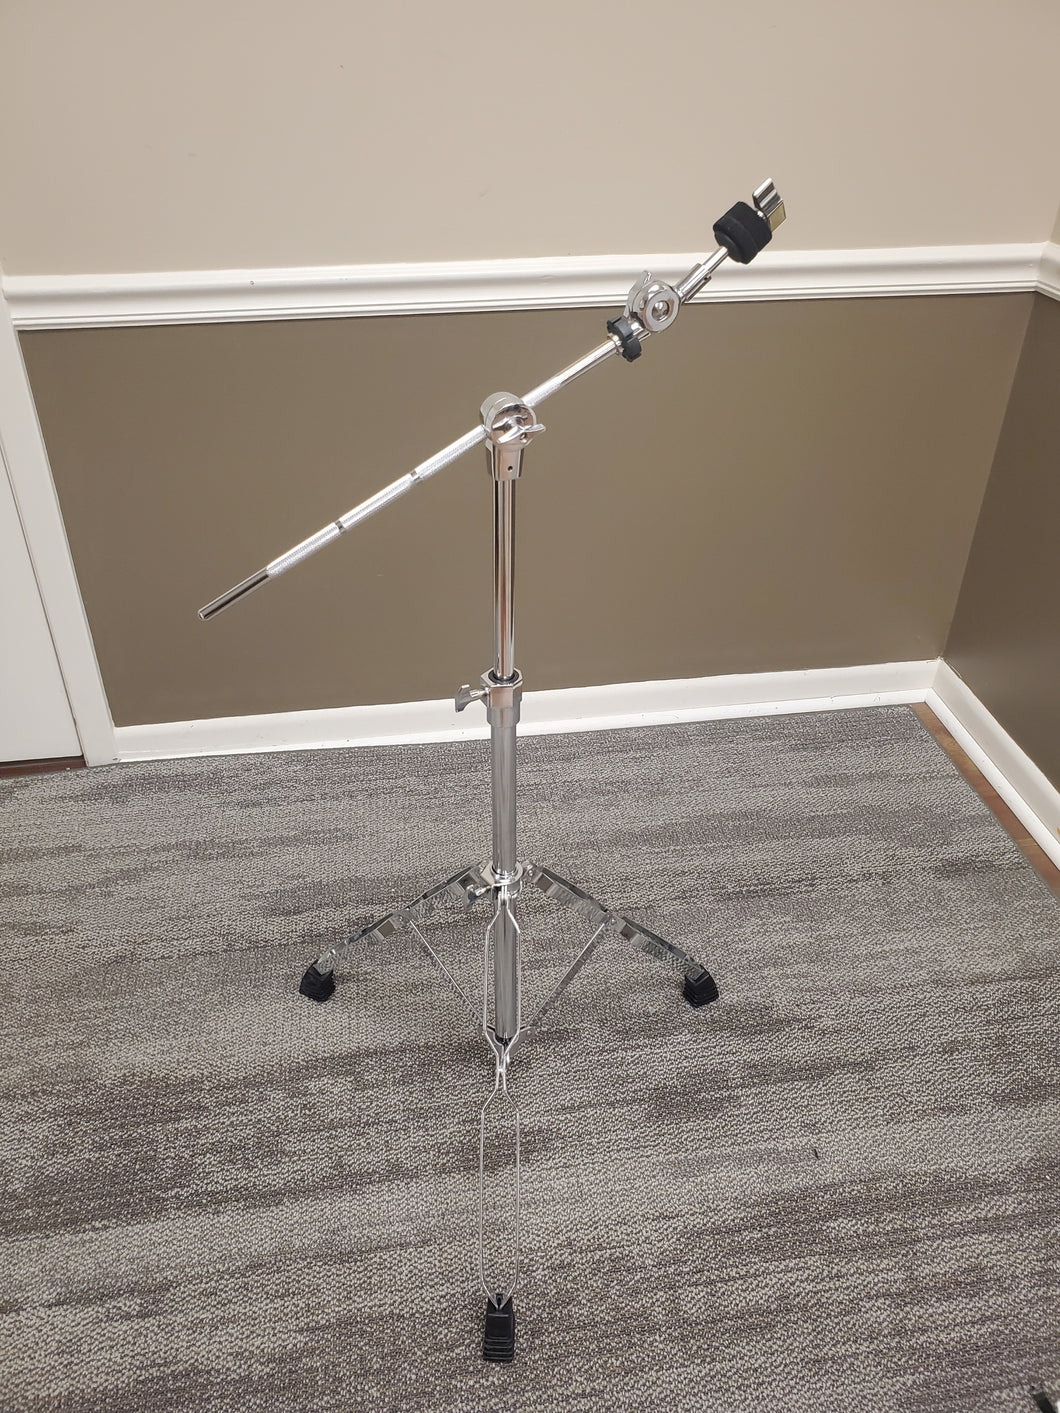 Efnote Cymbal Boom Stand Used